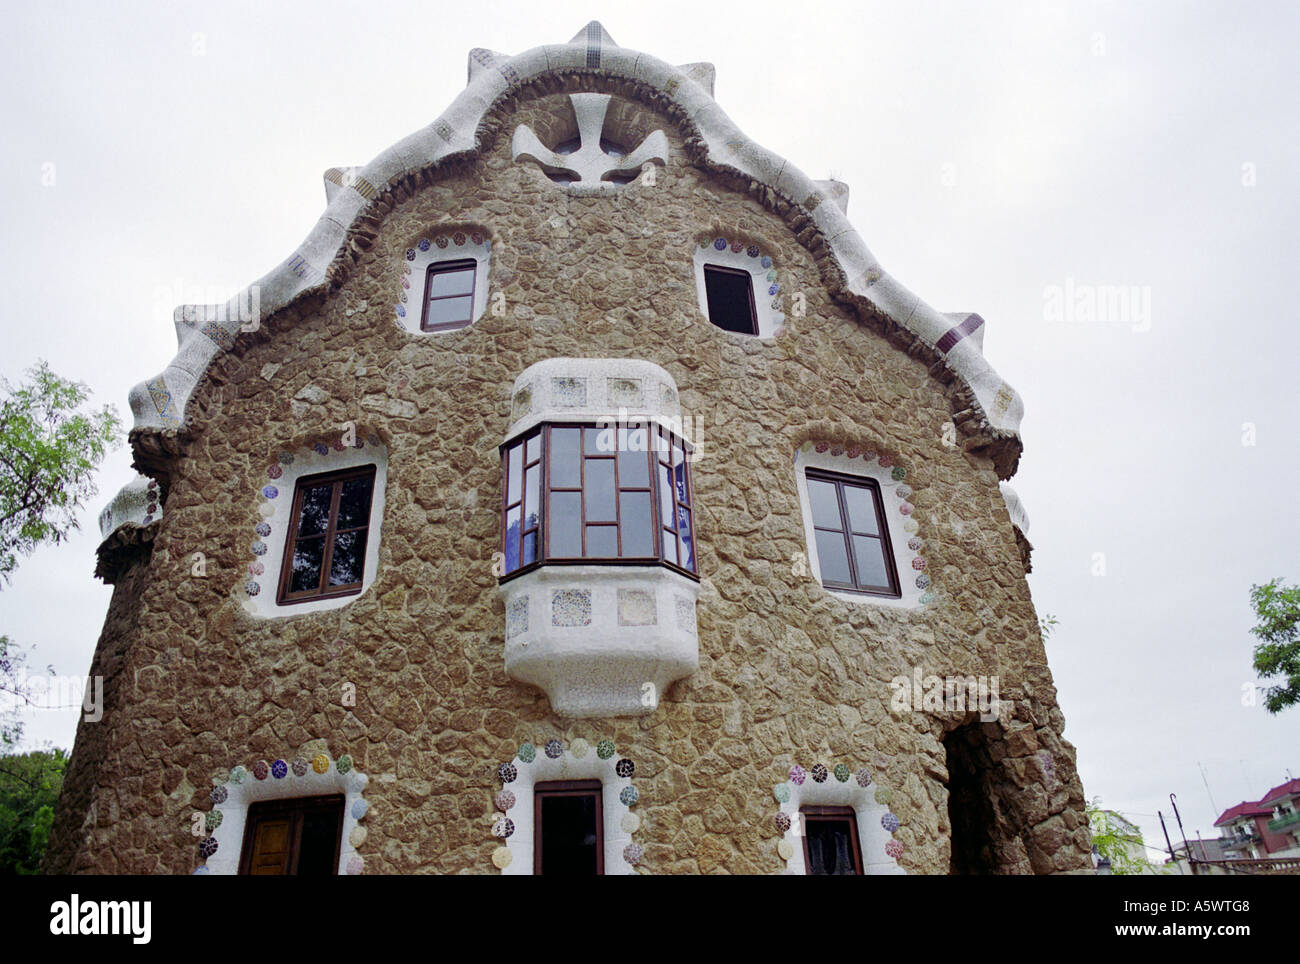 The façade of the Gaudi Museum Parc Guell Barcelona Spain. The building was originally the porters’ lodge. Stock Photo